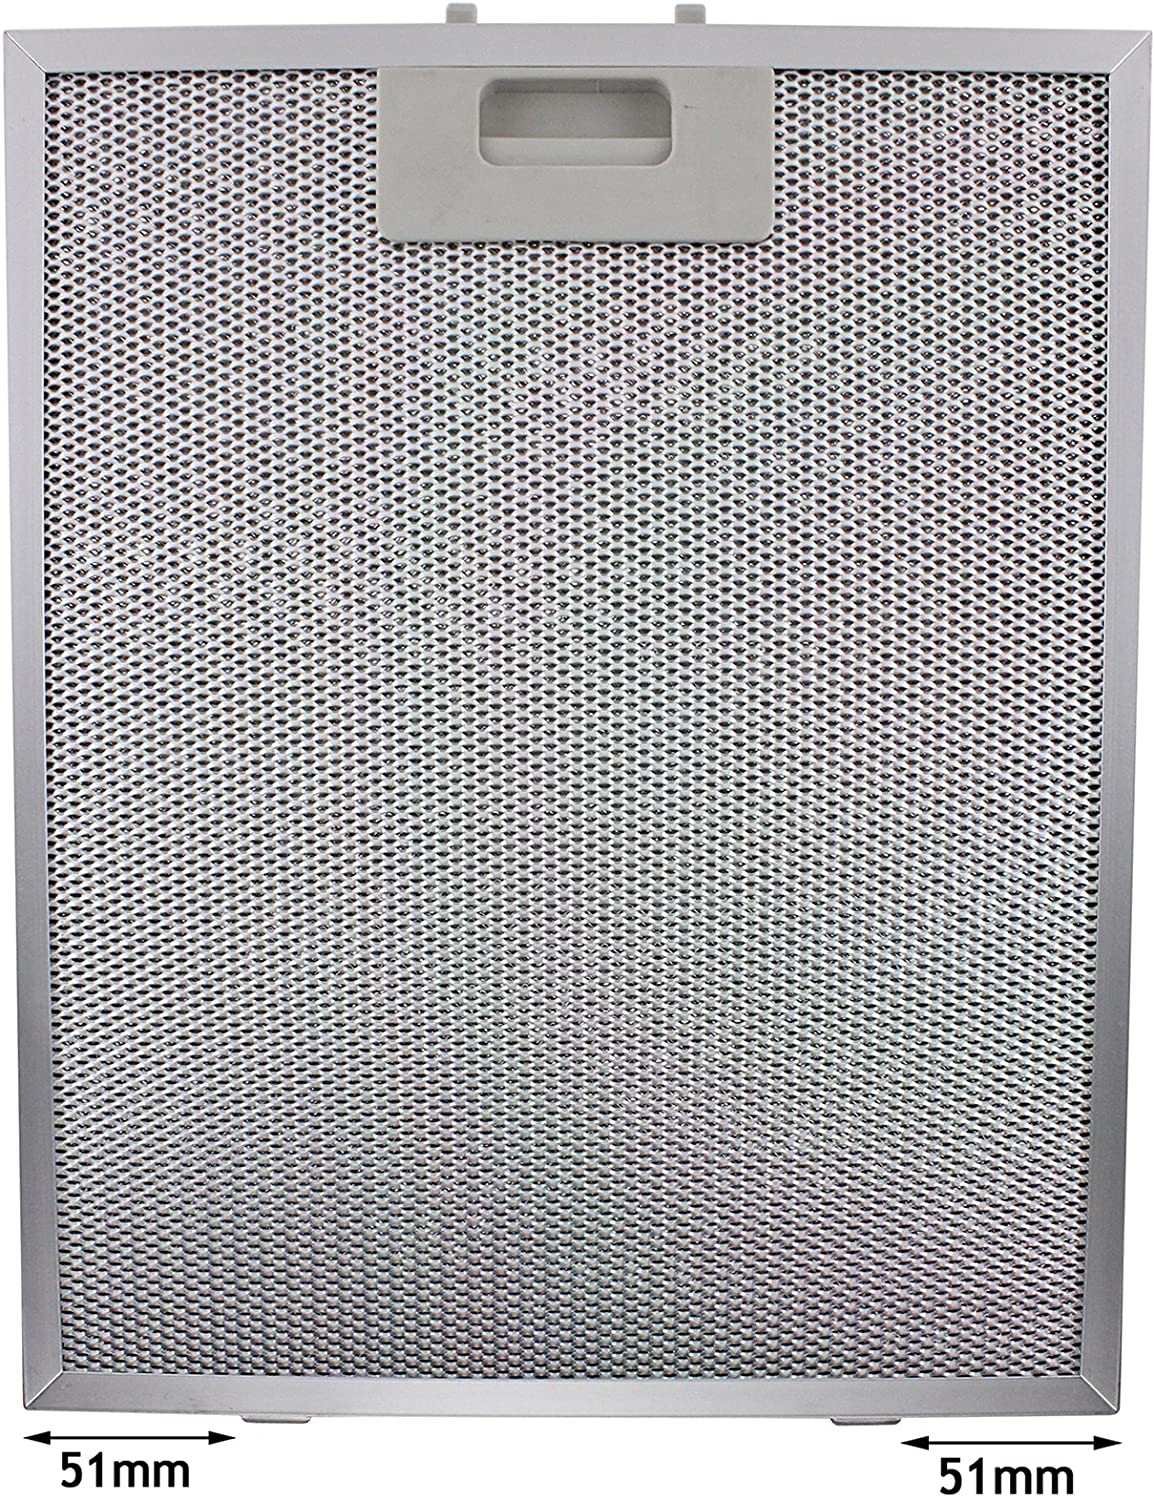 Cooker Hood Extractor Metal Grease Mesh Filter (Silver, 320 x 260mm)